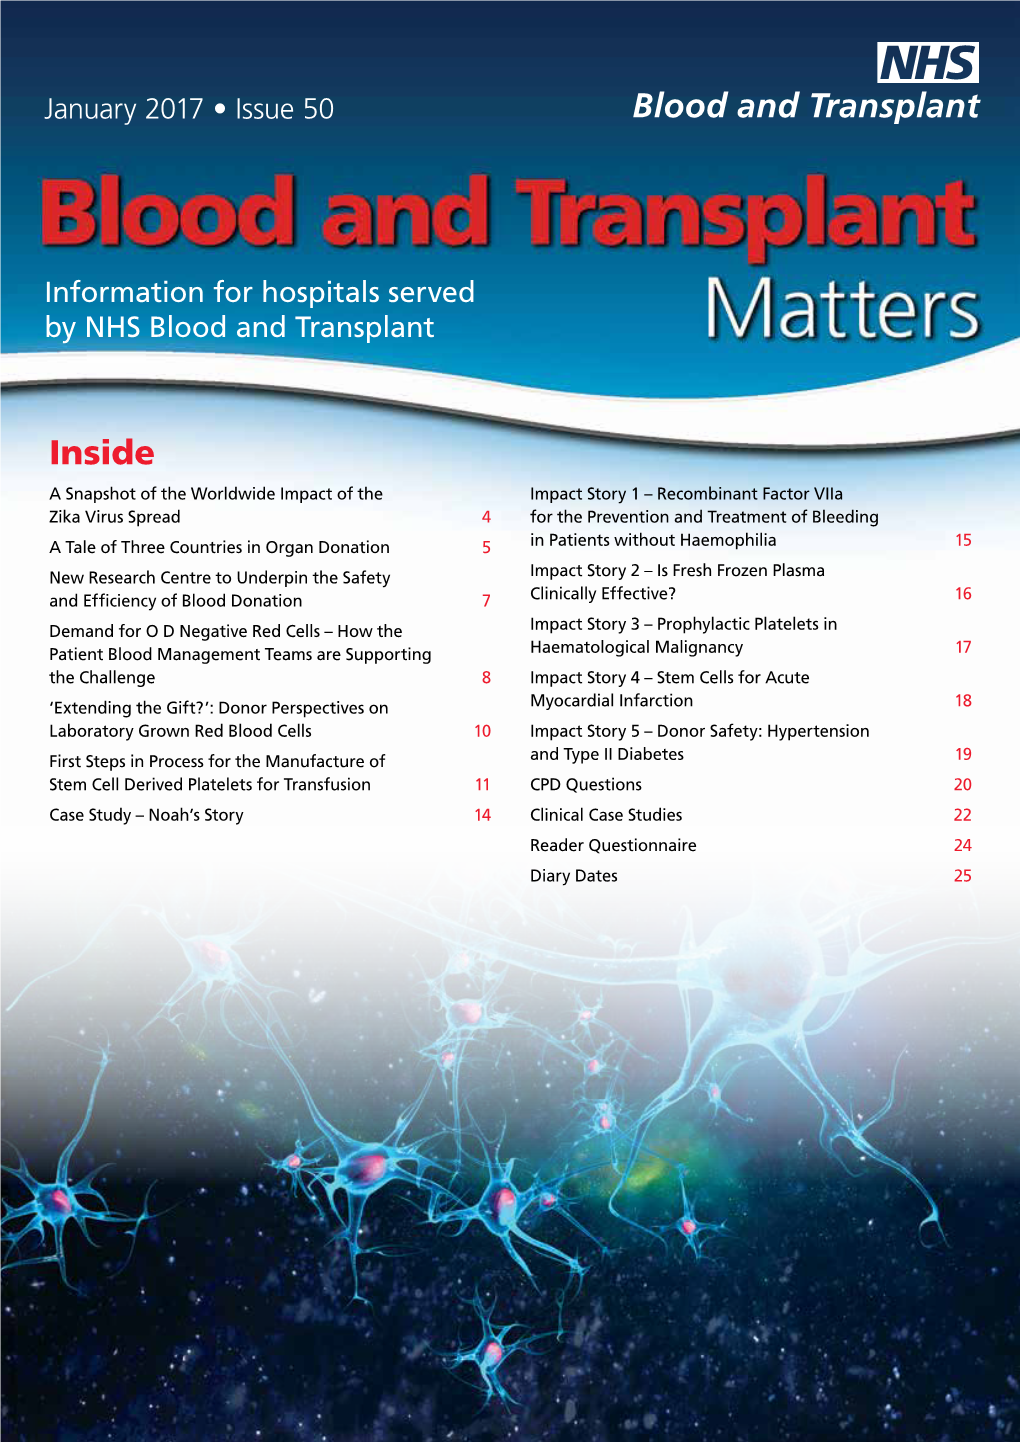 27572 Blood and Transplant Matters (Issue 49)